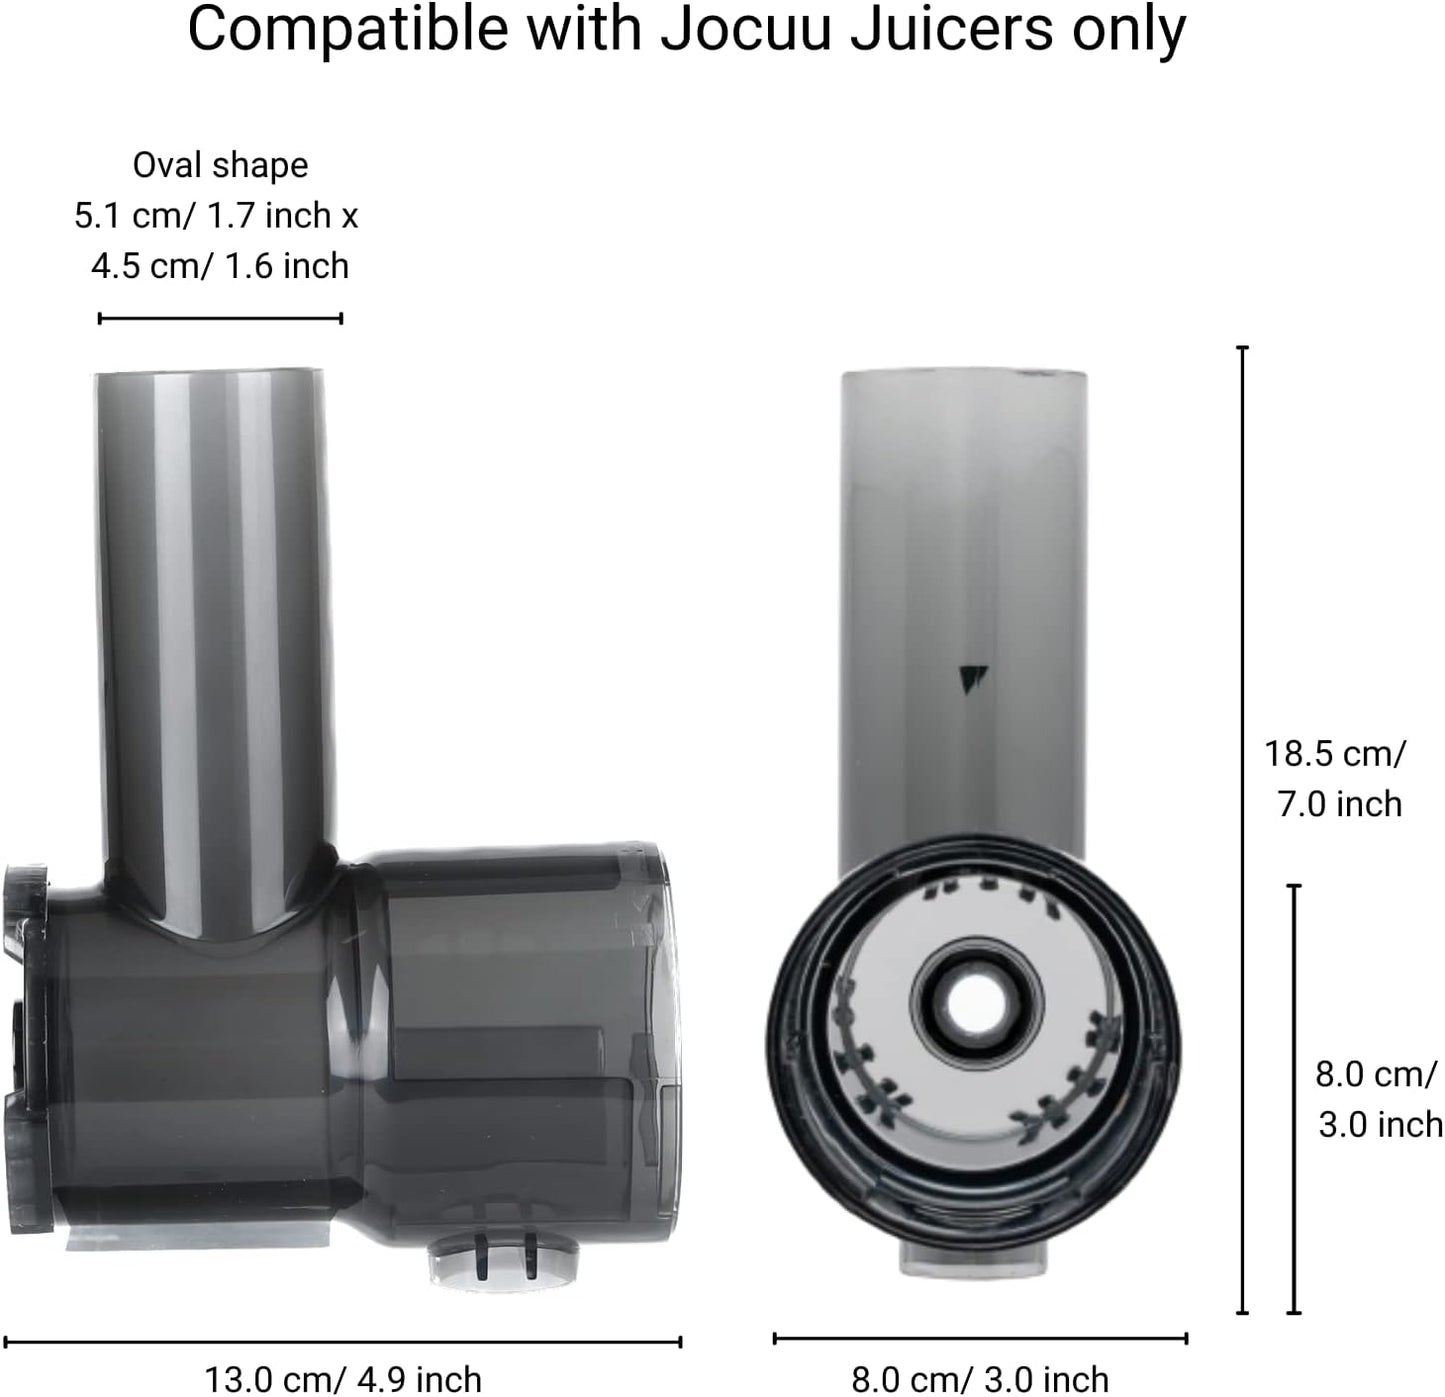 Jocuu Juicer Accessory no. 5, Juicing Body Replacement Part for Slow Masticating Juicer ZM1503